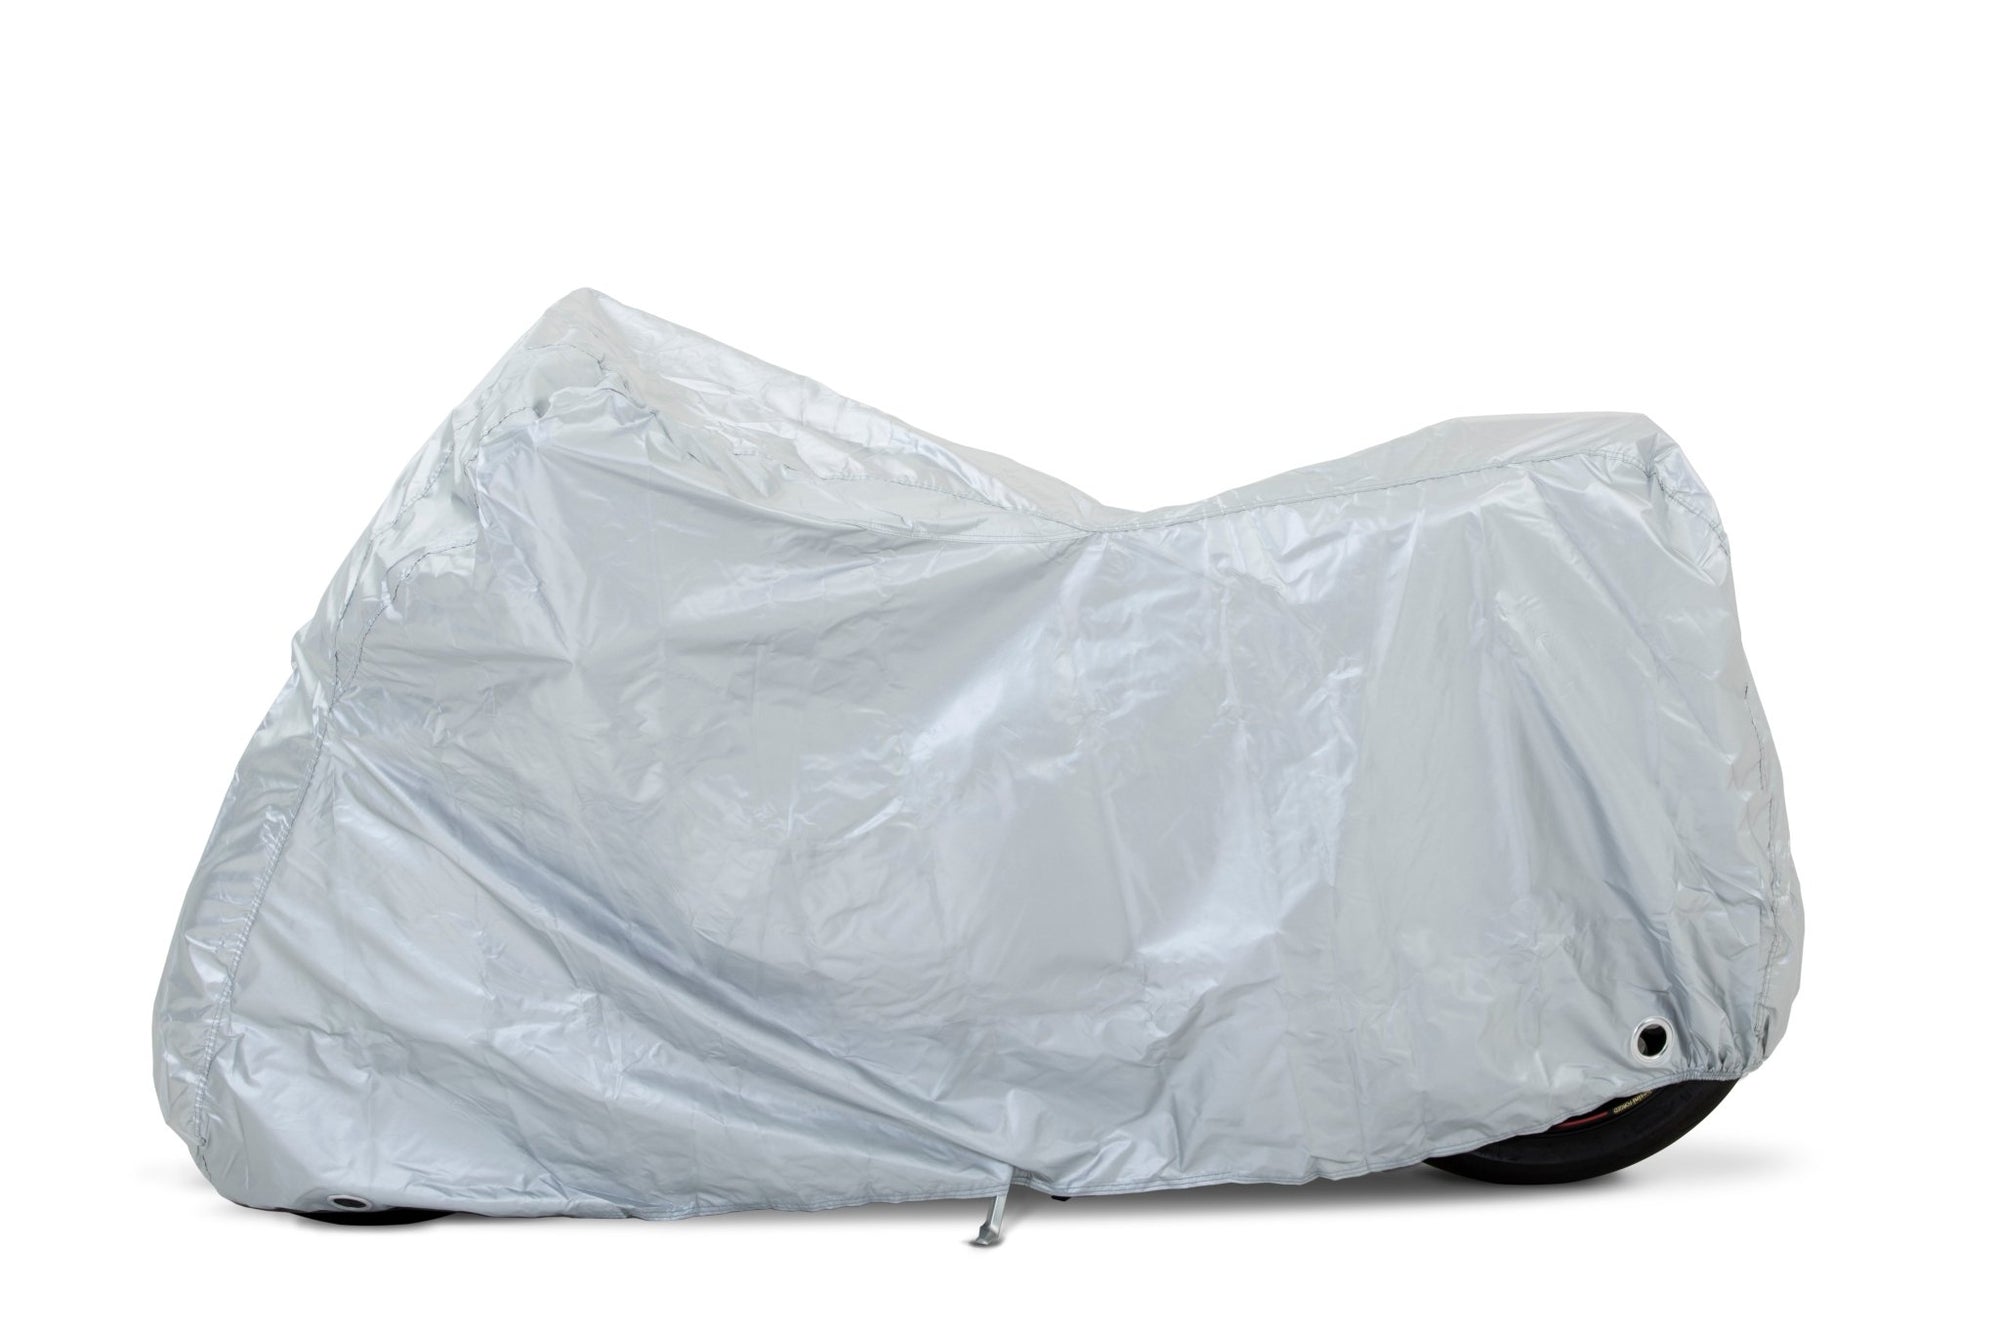 Outdoor Motorcycle Covers - Storm Motorcycle Covers